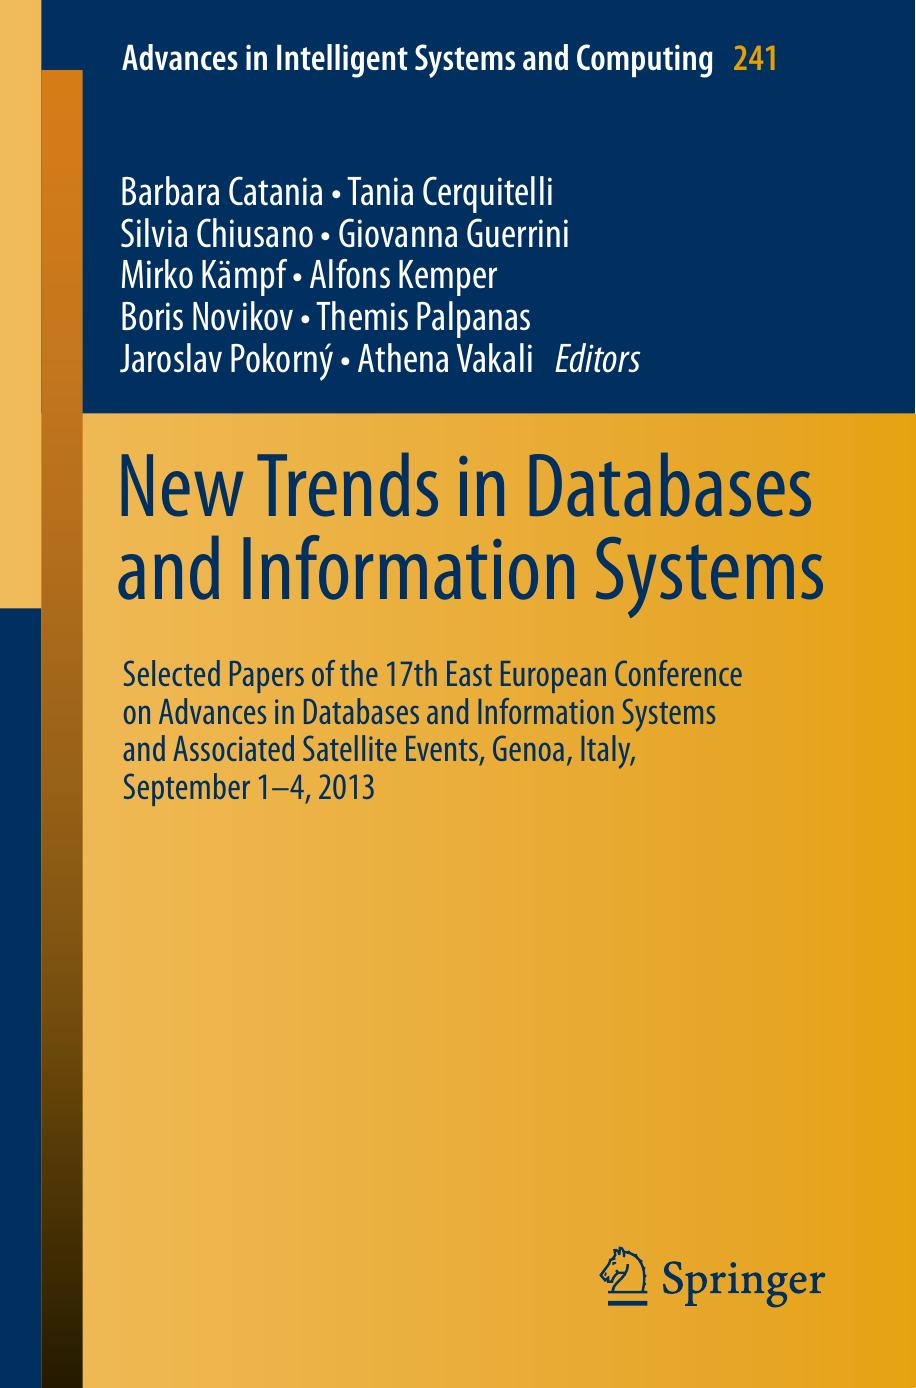 New Trends in Databases and Information Systems: 17th East European Conference on Advances in Databases and Information Systems